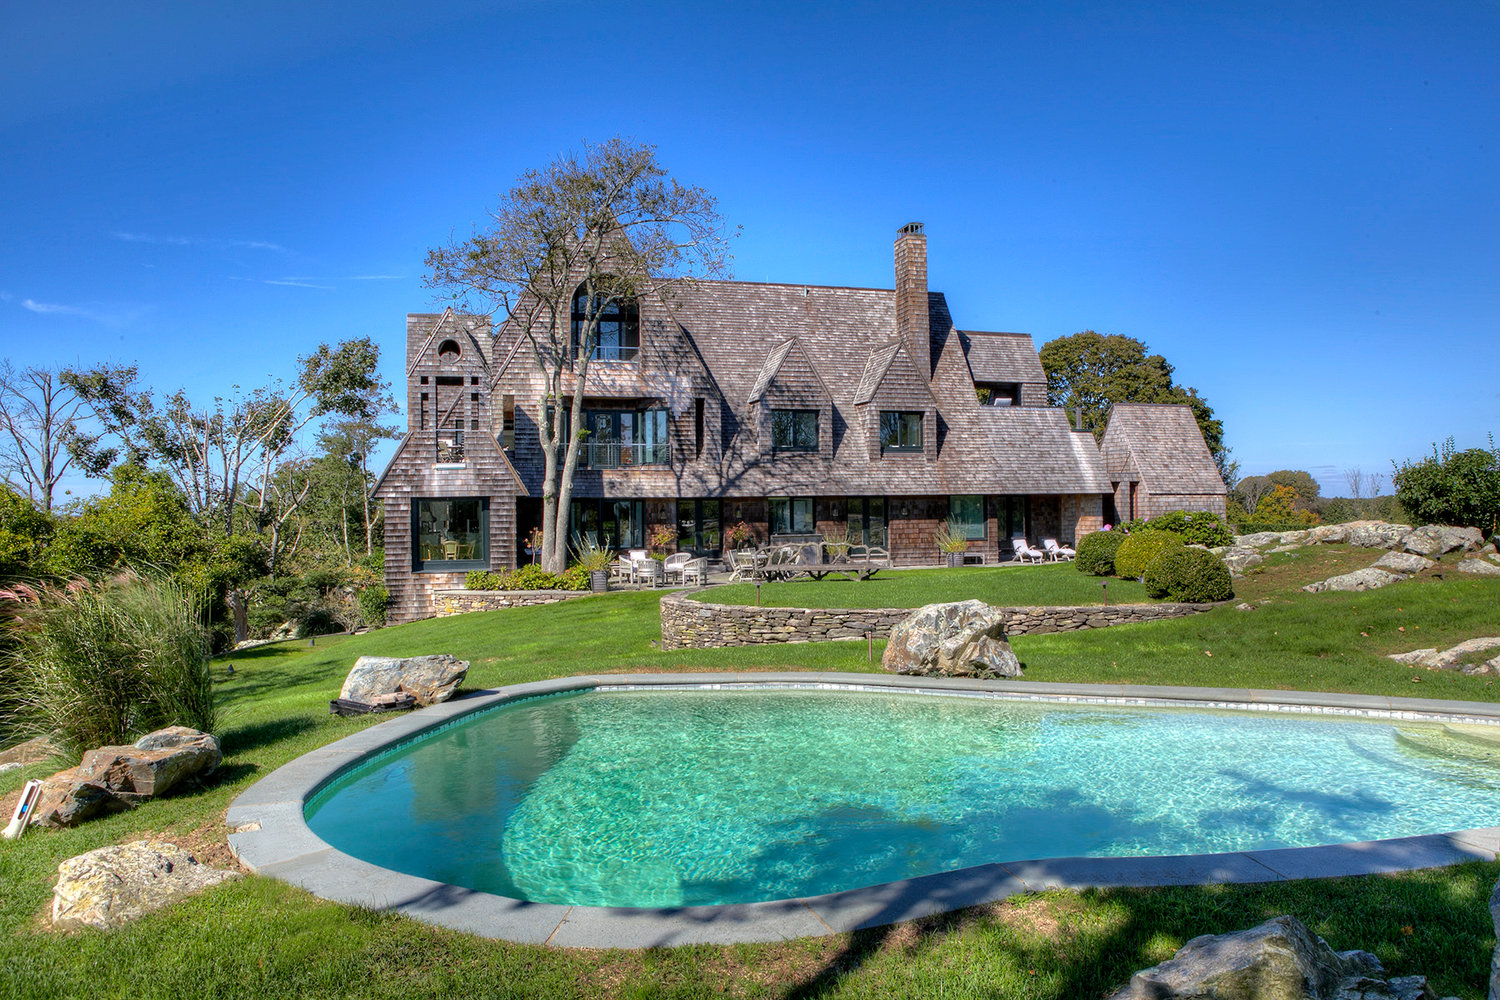 This Newport home, set on the highest point on the island with spectacular views in all directions, spent almost two years on the market before it sold this summer for $6.65 million. Agent Kate Greenman said buyers for a place like this are very smart and will know the right price for these exclusive properties.